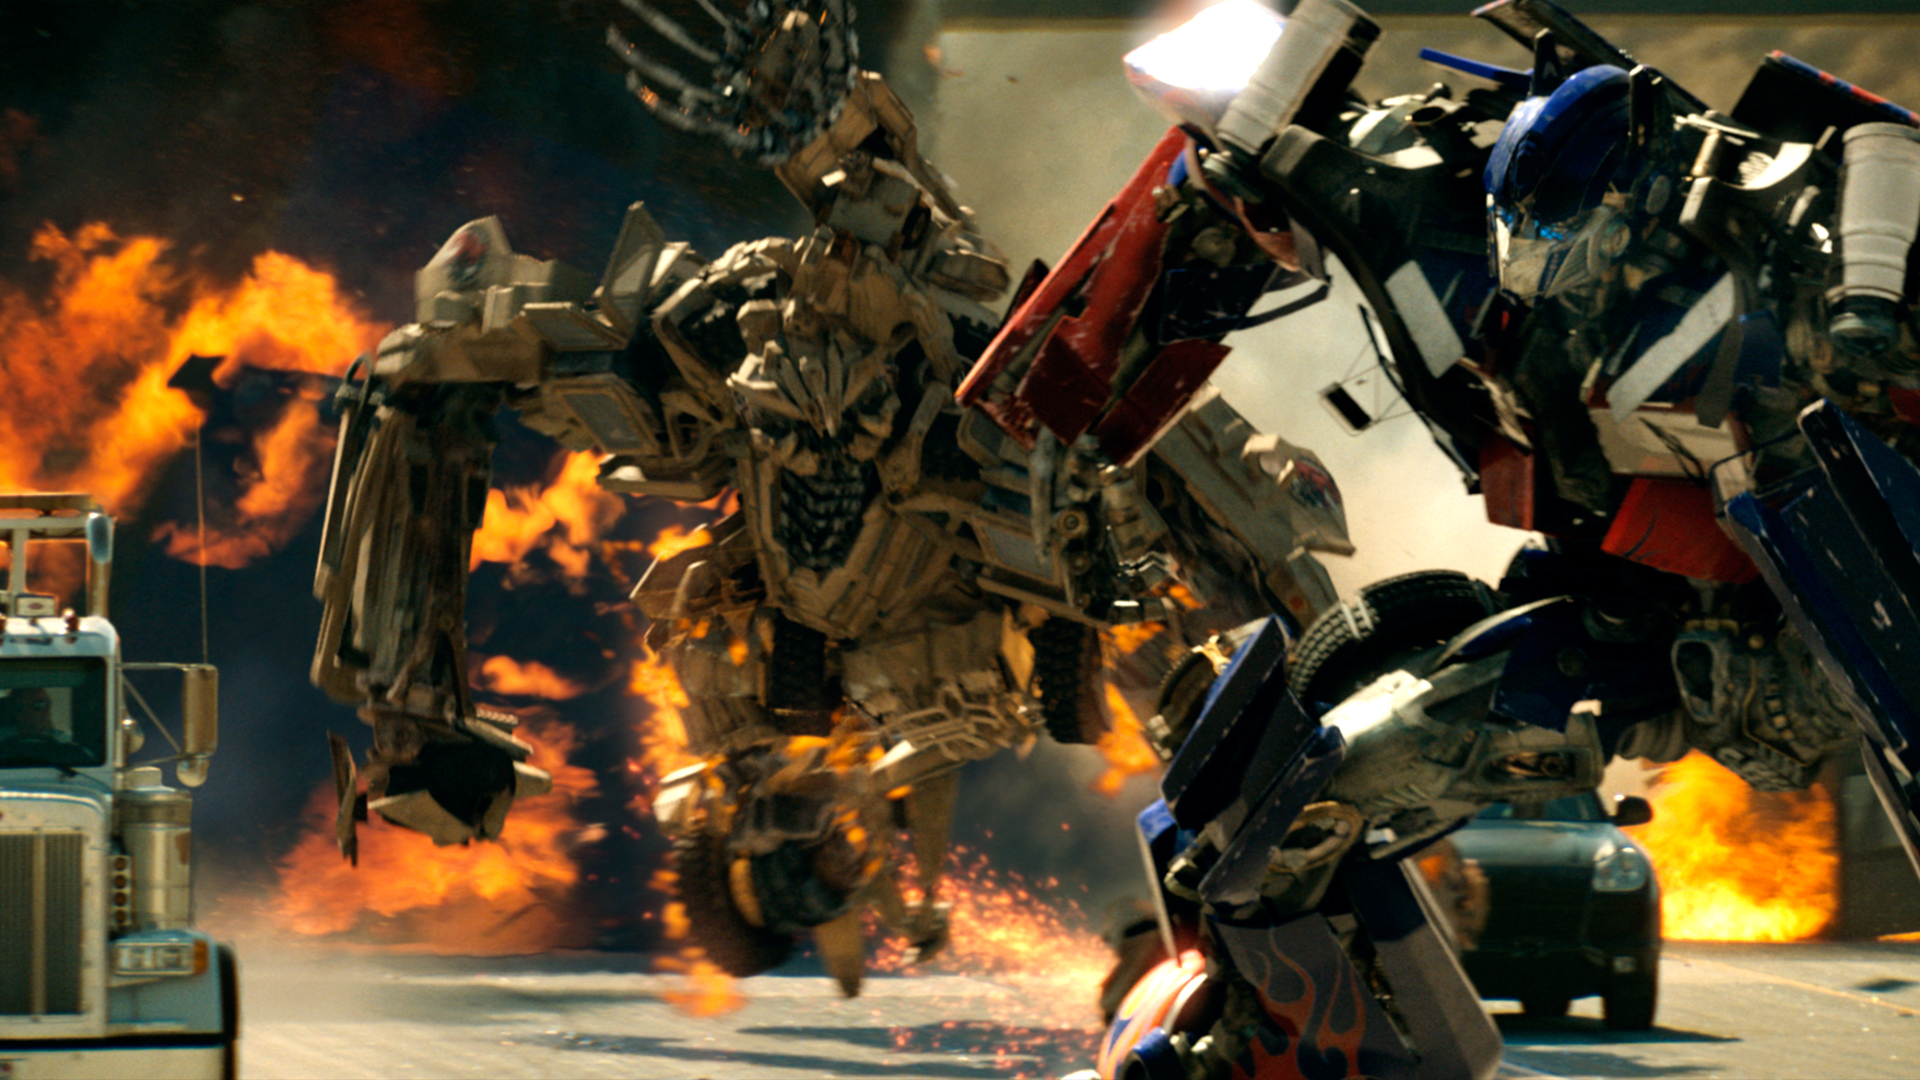 Optimus Prime in an action-packed highway chase sequence from the Oscar-nominated film Transformers (2007). © Paramount Pictures. All Rights Reserved.